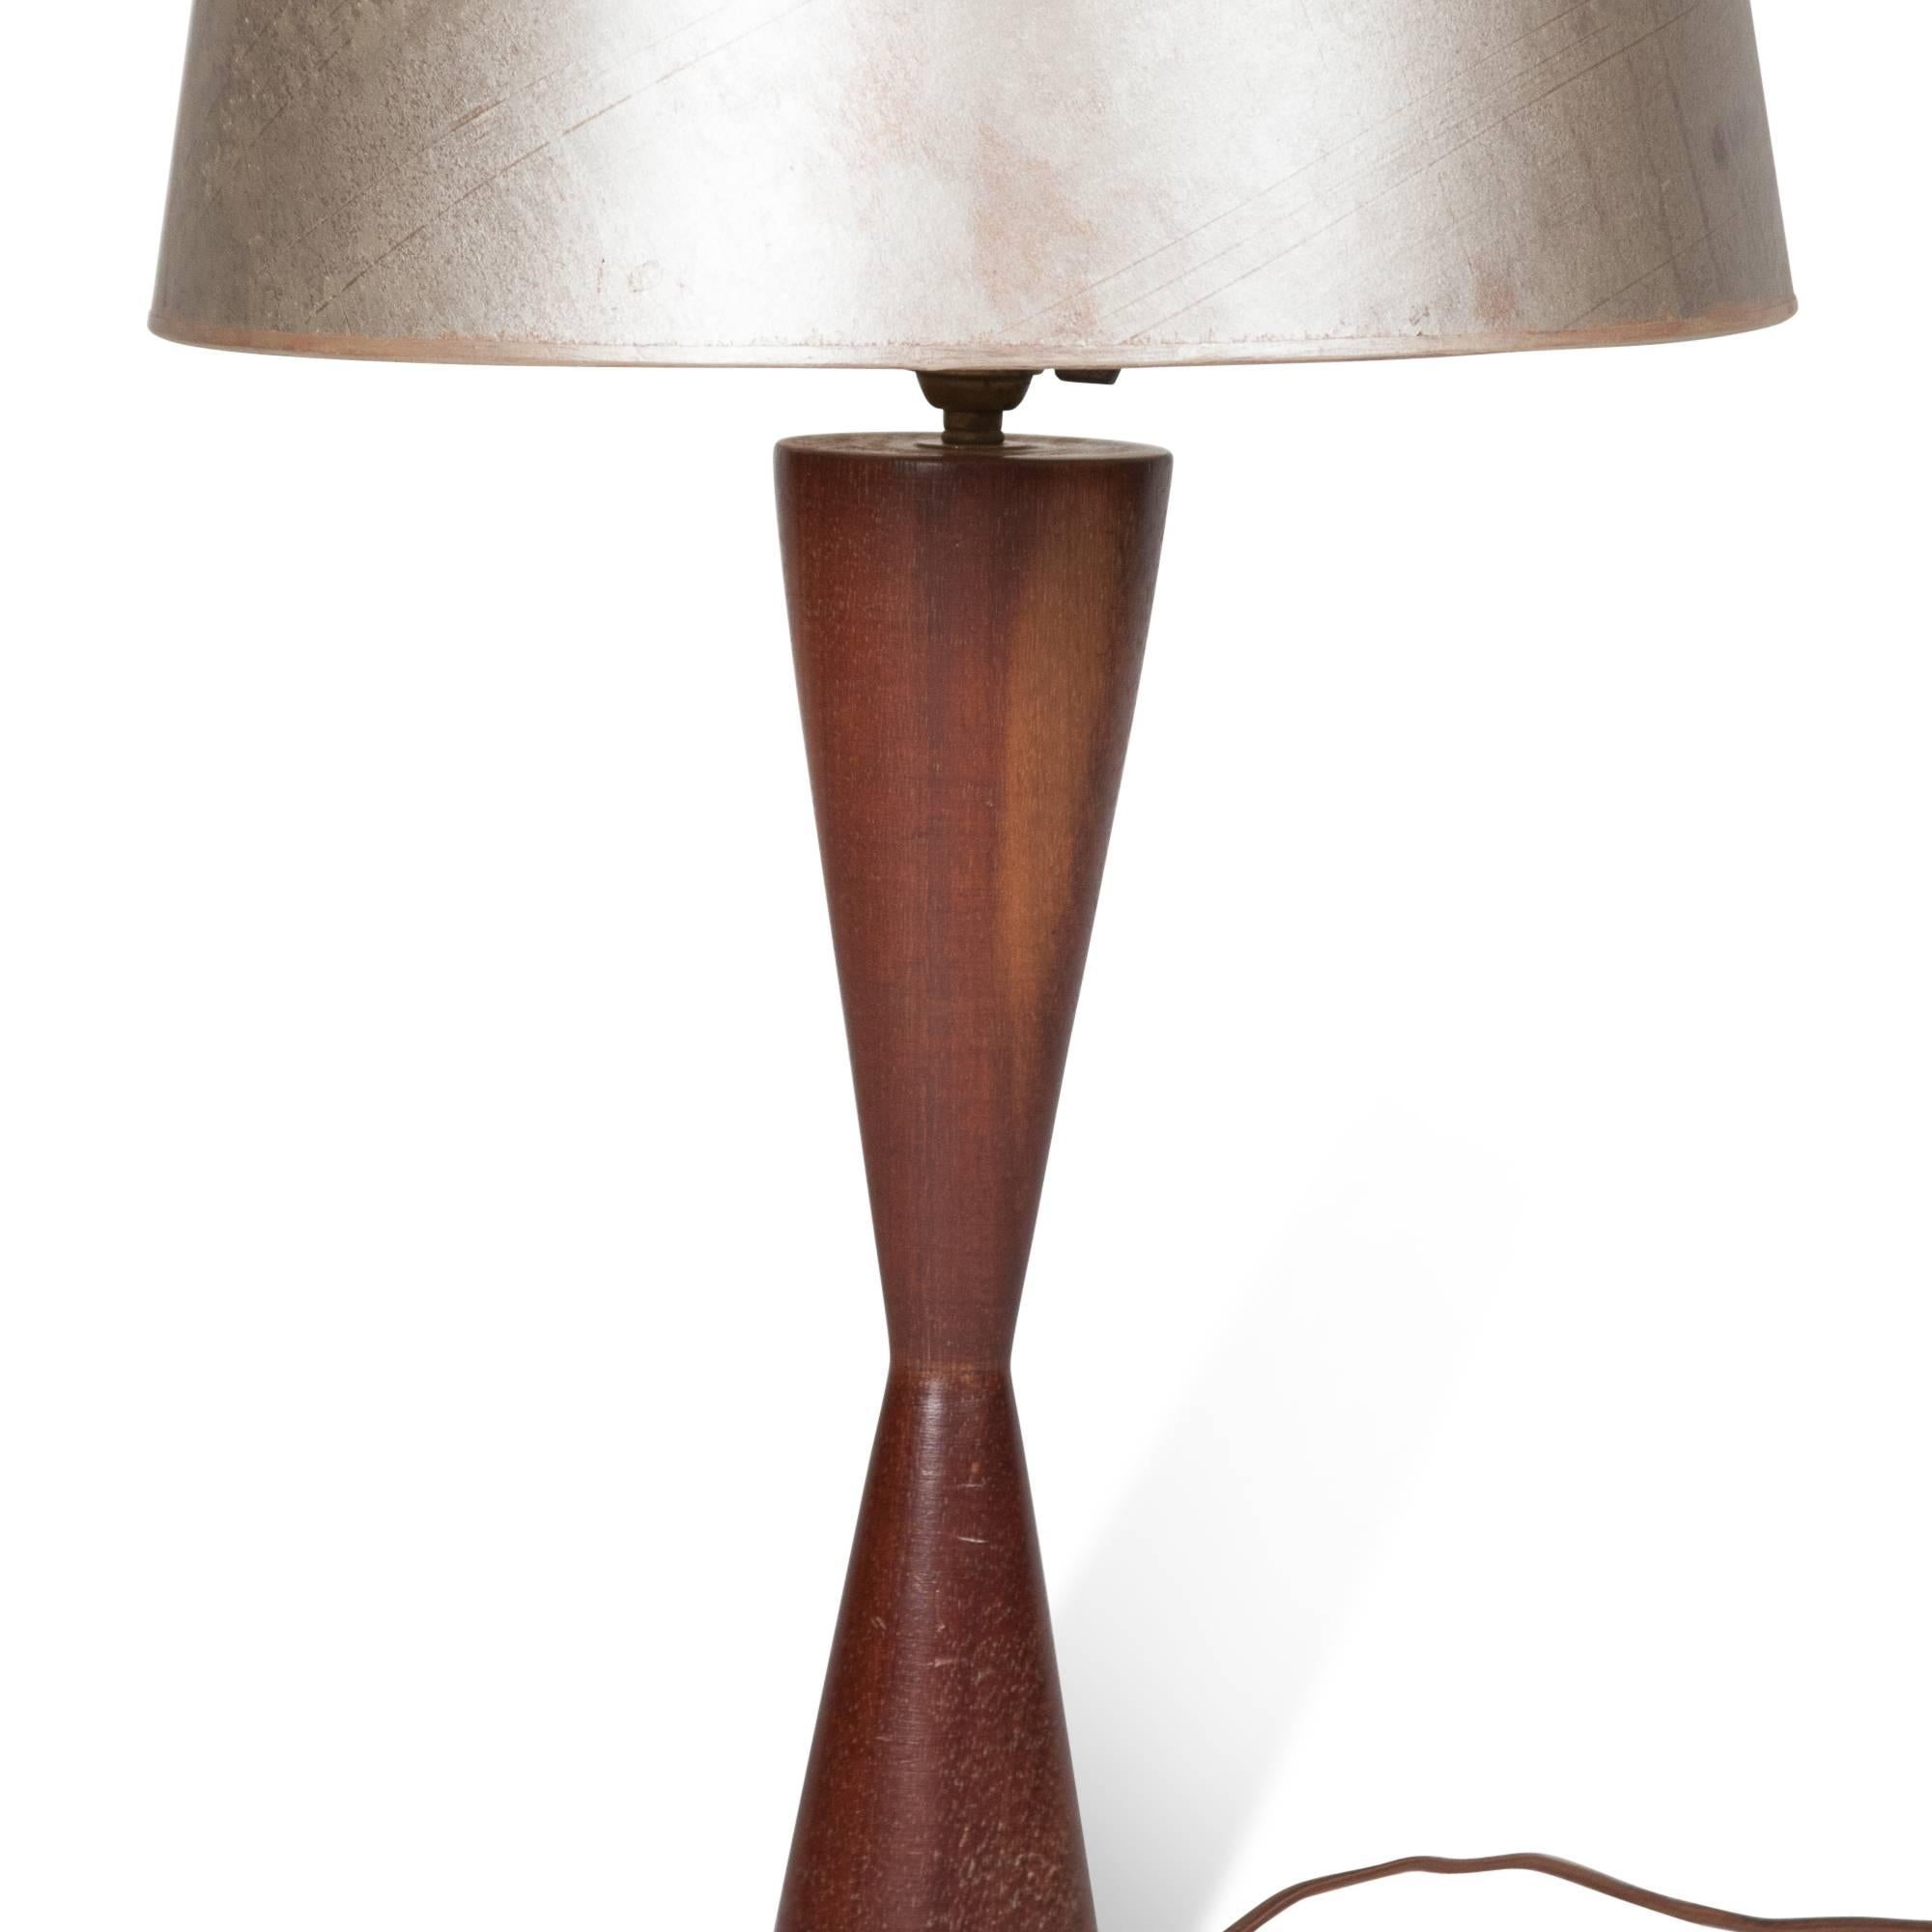 Turned Walnut Table Lamp, Danish, 1950s For Sale 2